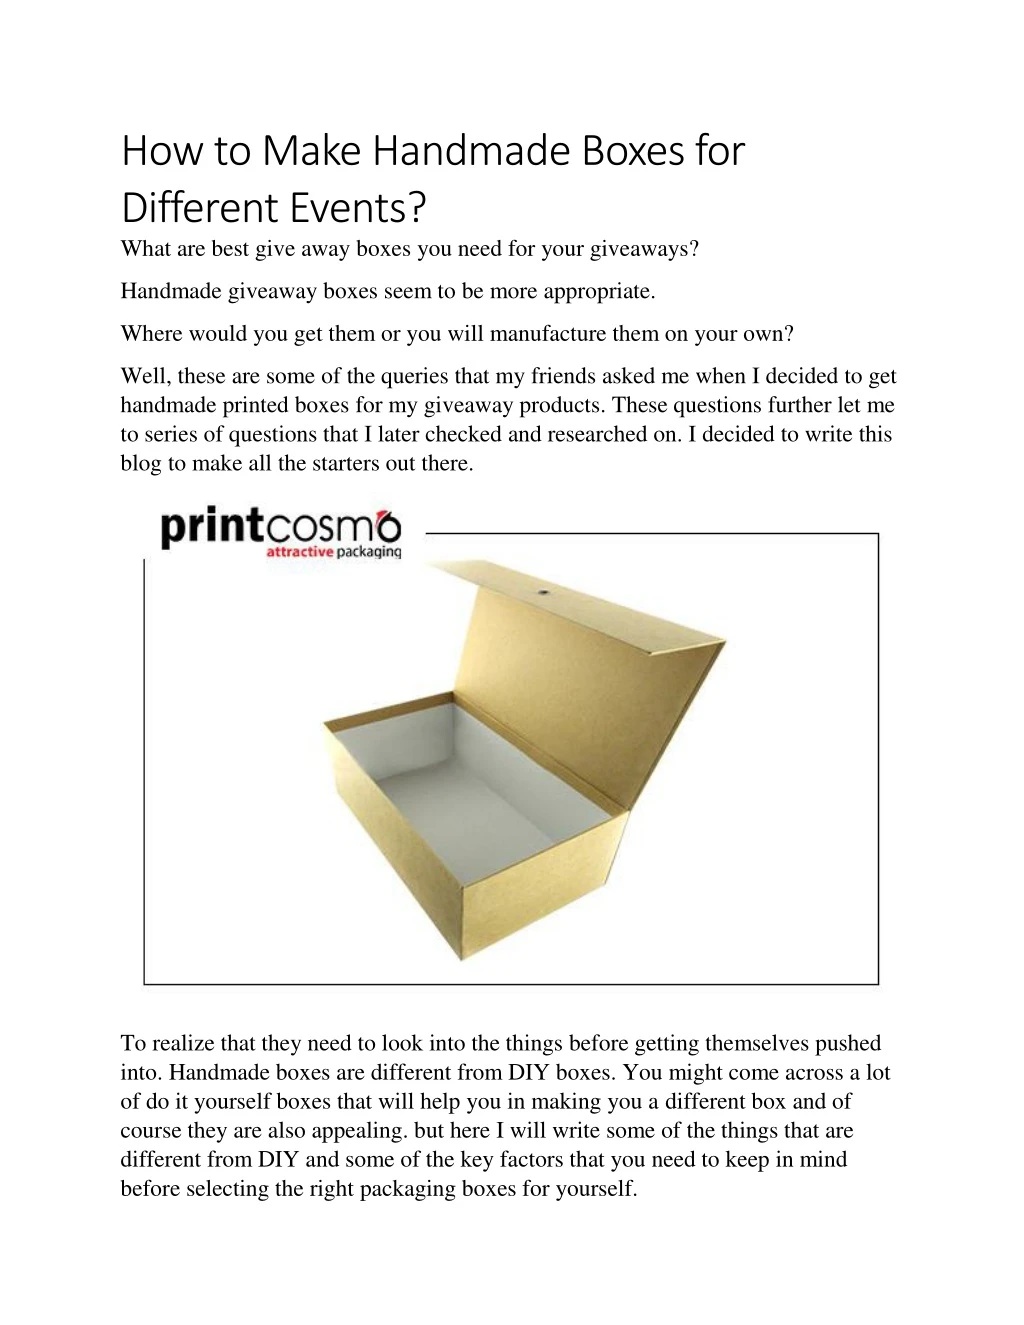 how to make handmade boxes for different events